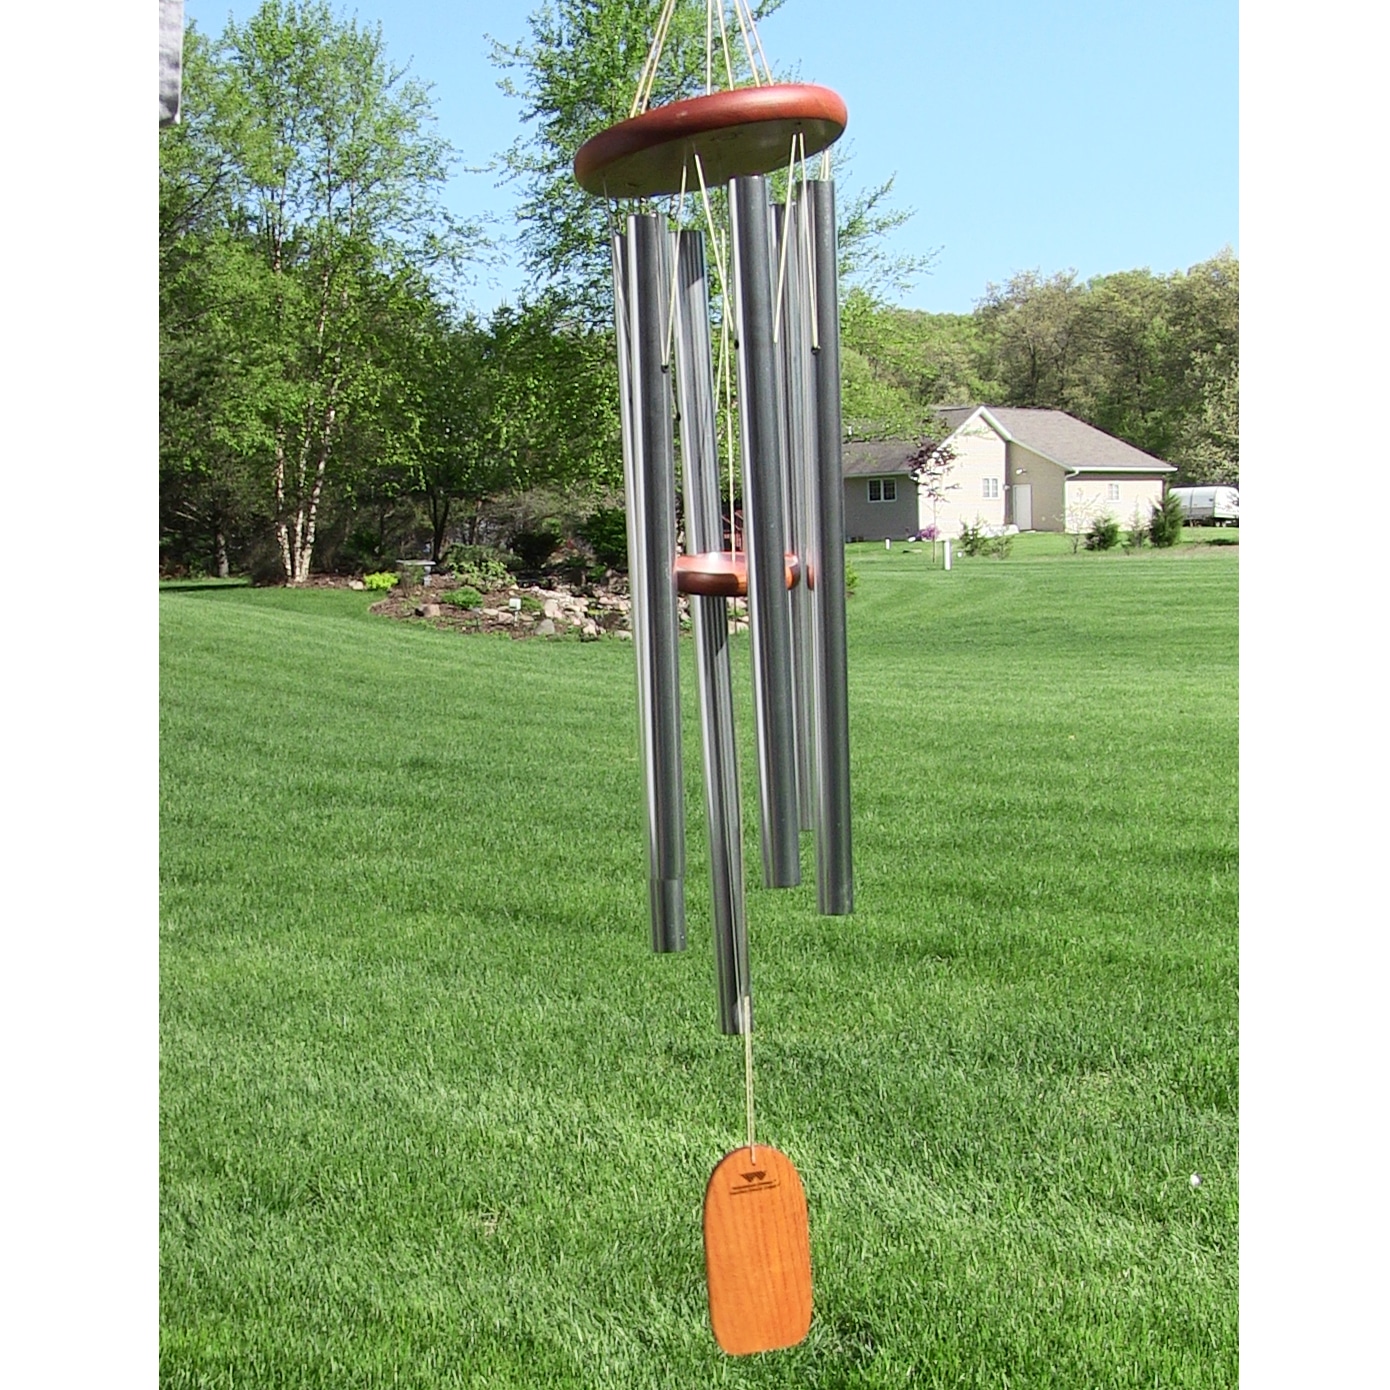 How to choose the best wind chimes sounds for your outdoor space